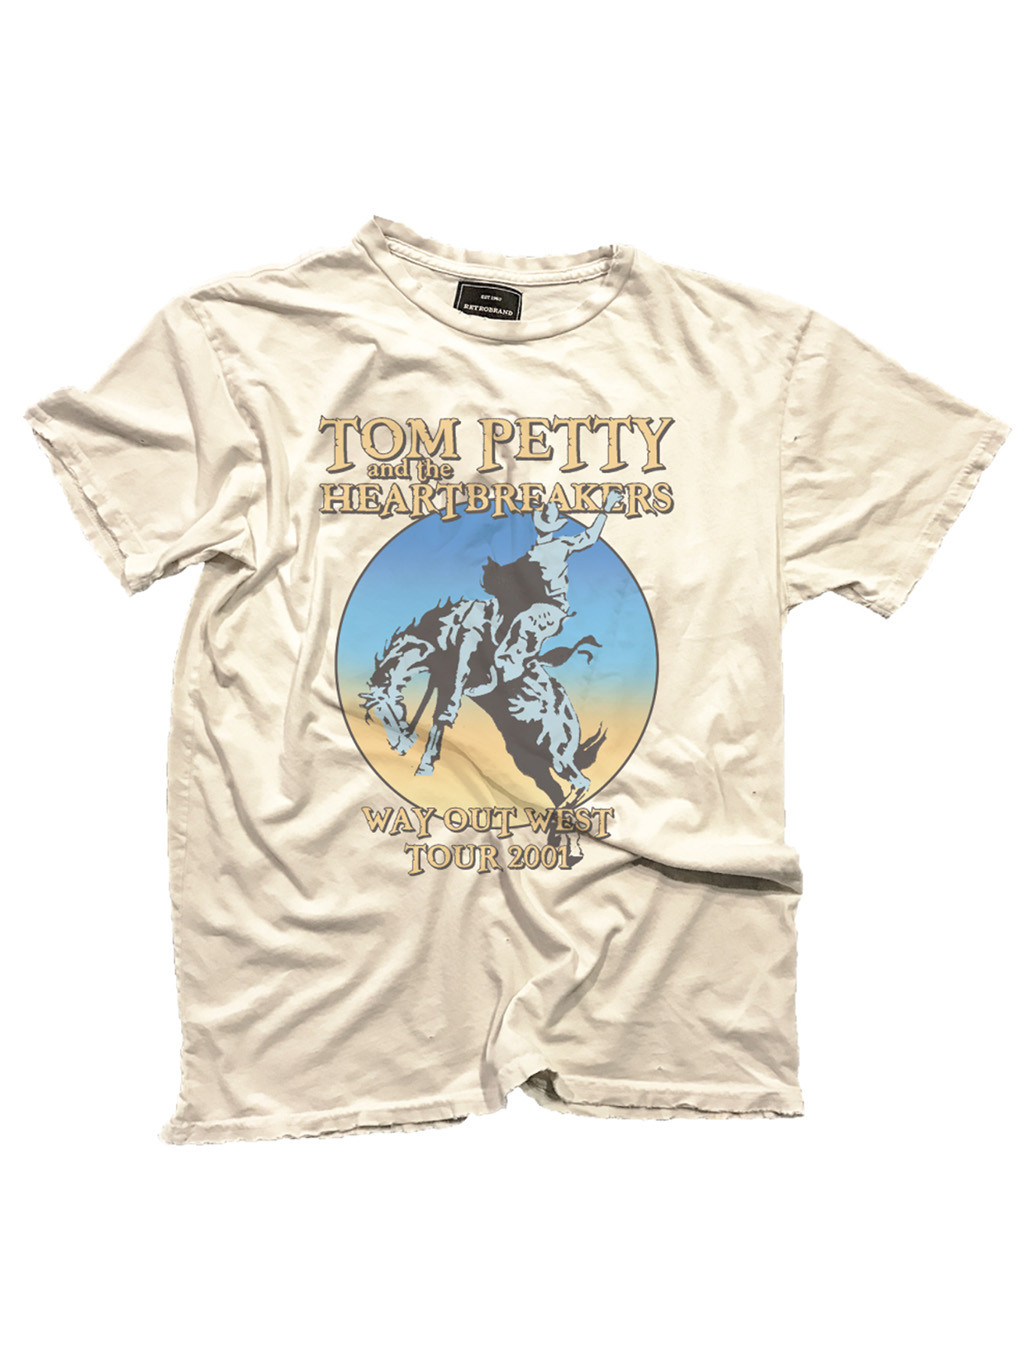 Tom Petty and the Heartbreakers Way Out West Tour Tee